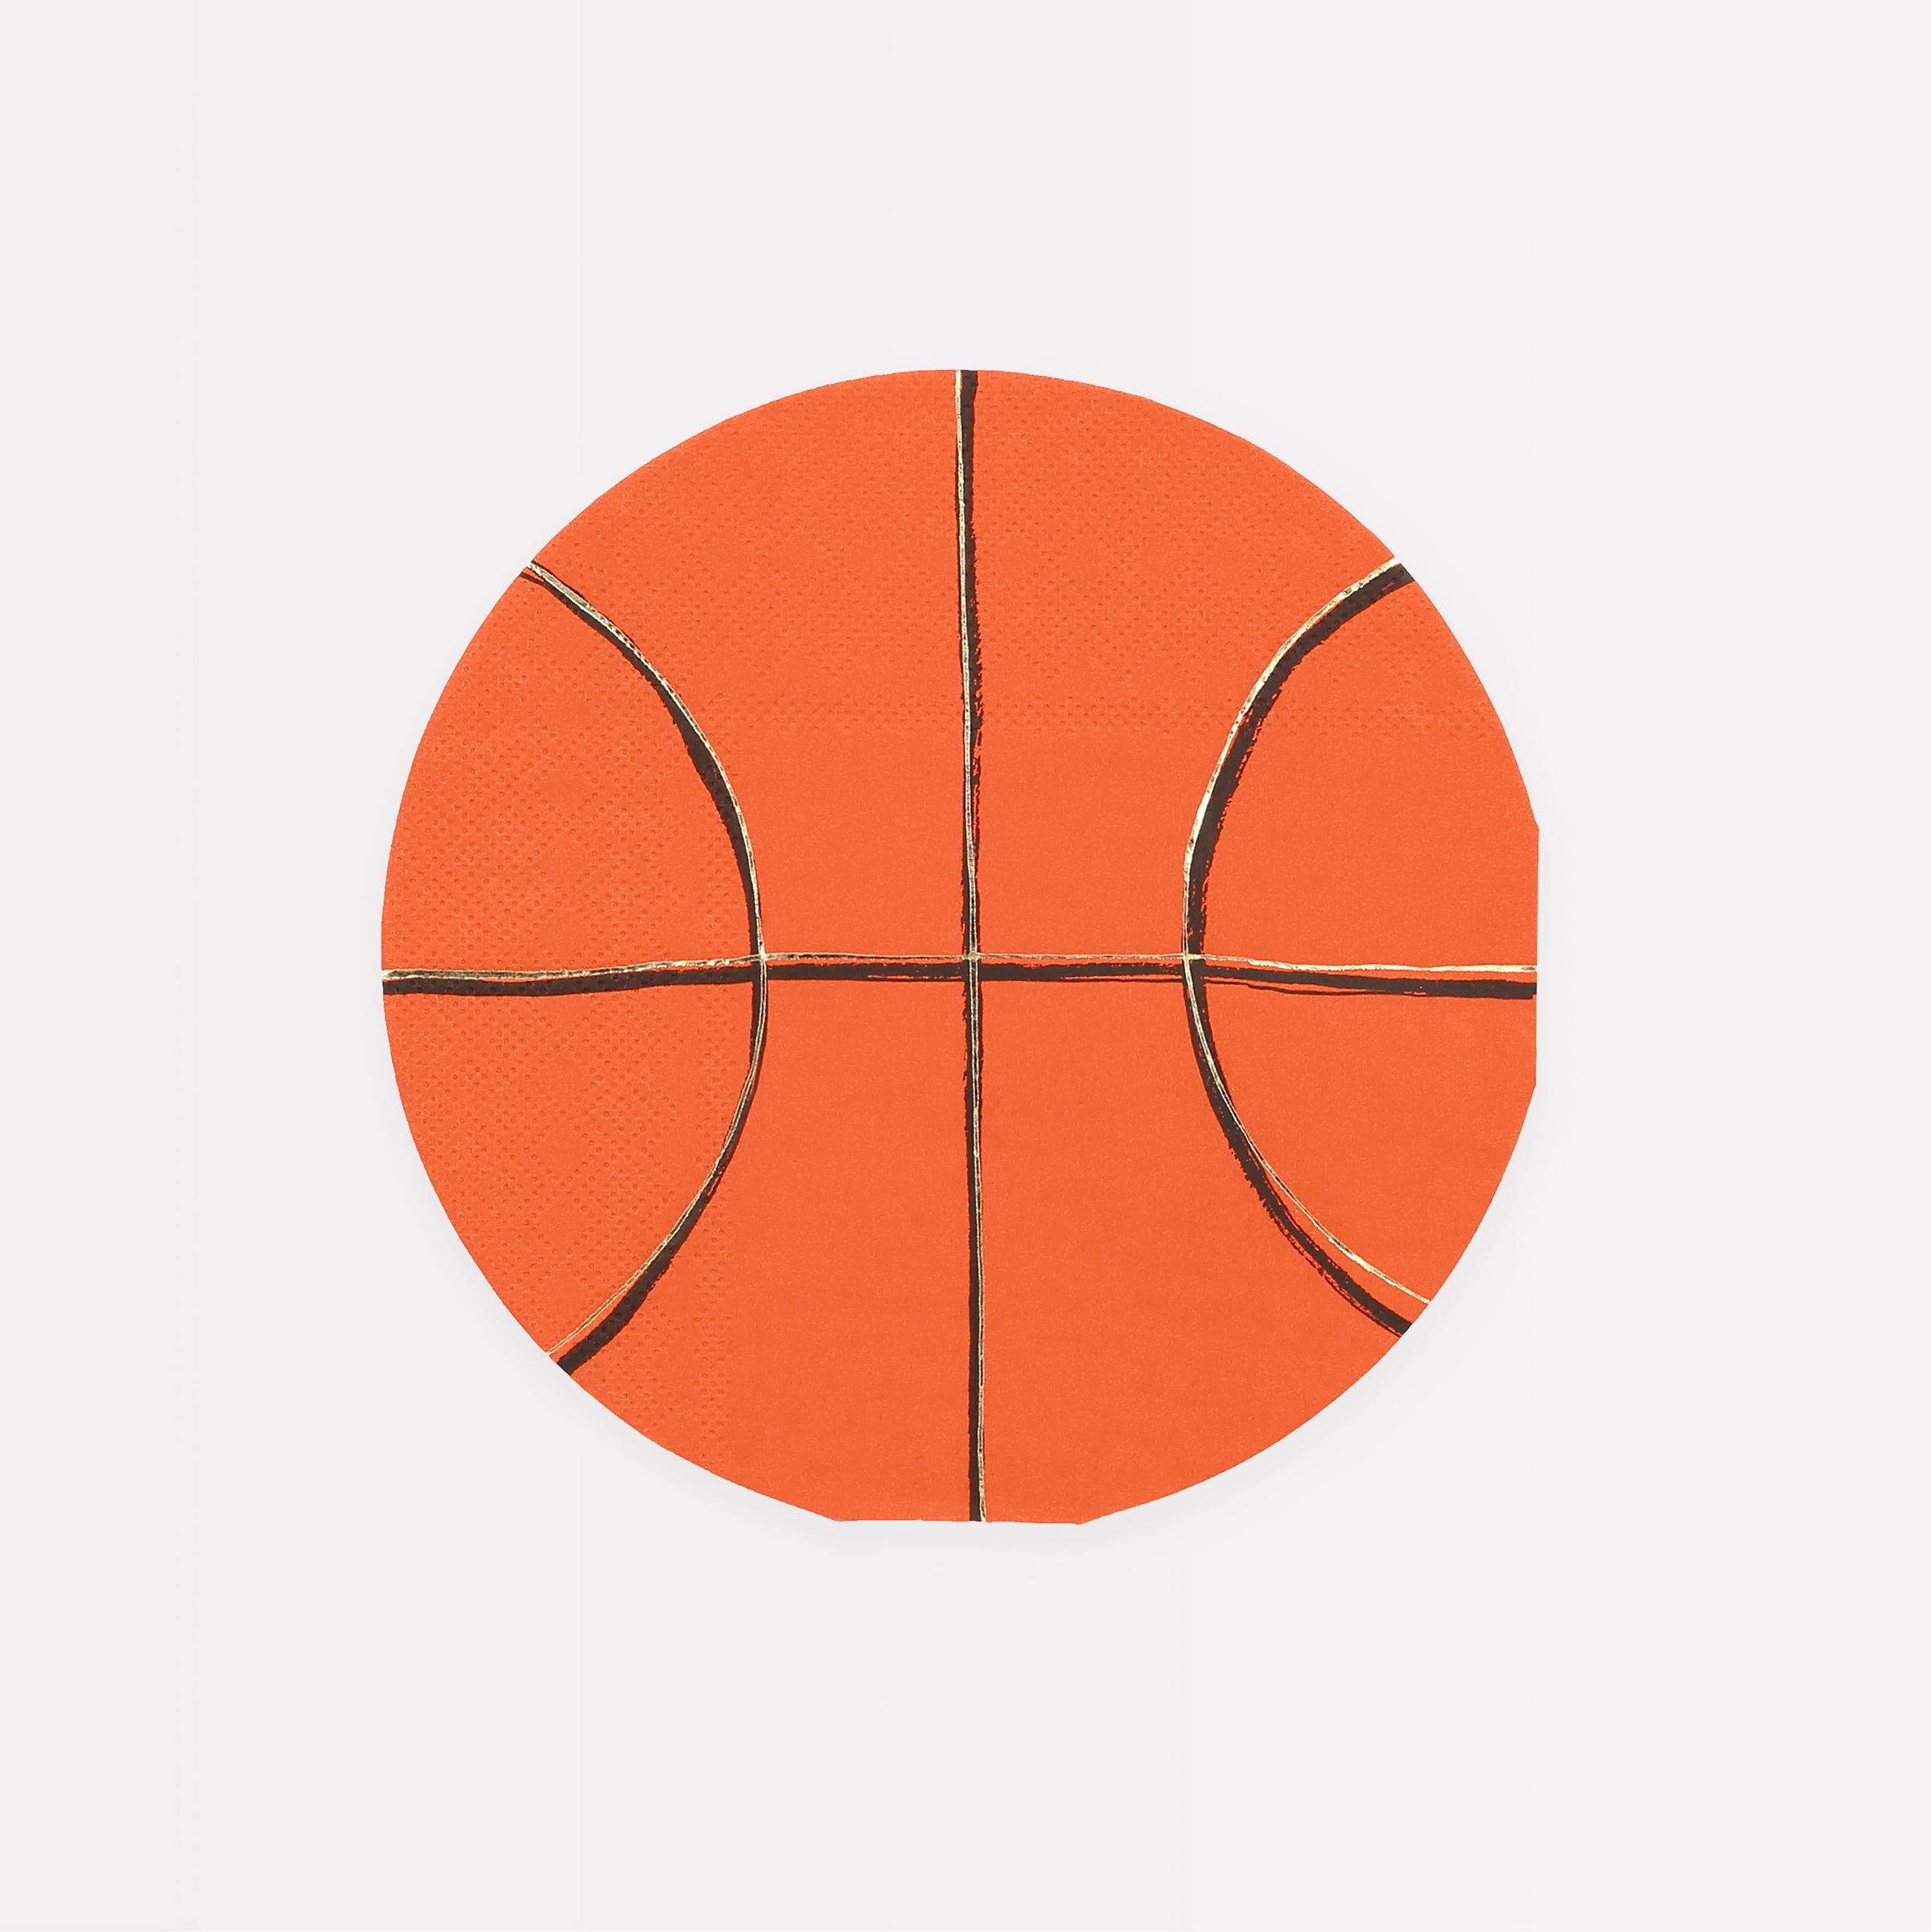 Our napkins, in the shape of a basketball with gold foil details, are perfect for basketball party supplies.